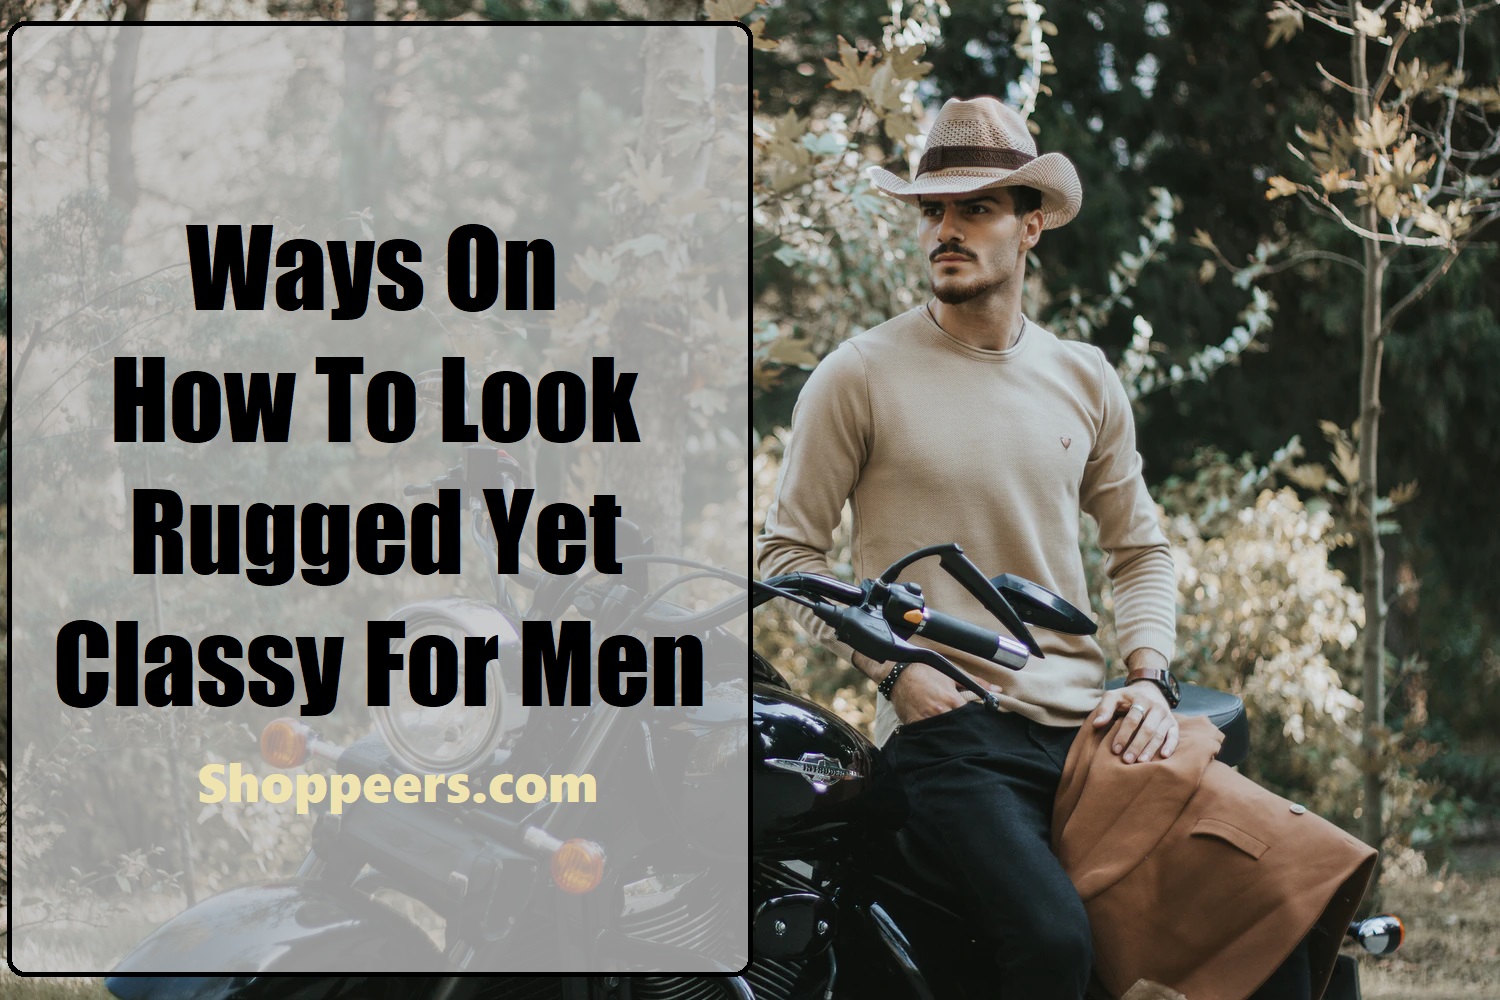 Ways On How To Look Rugged Yet Classy For Men - Shoppeers